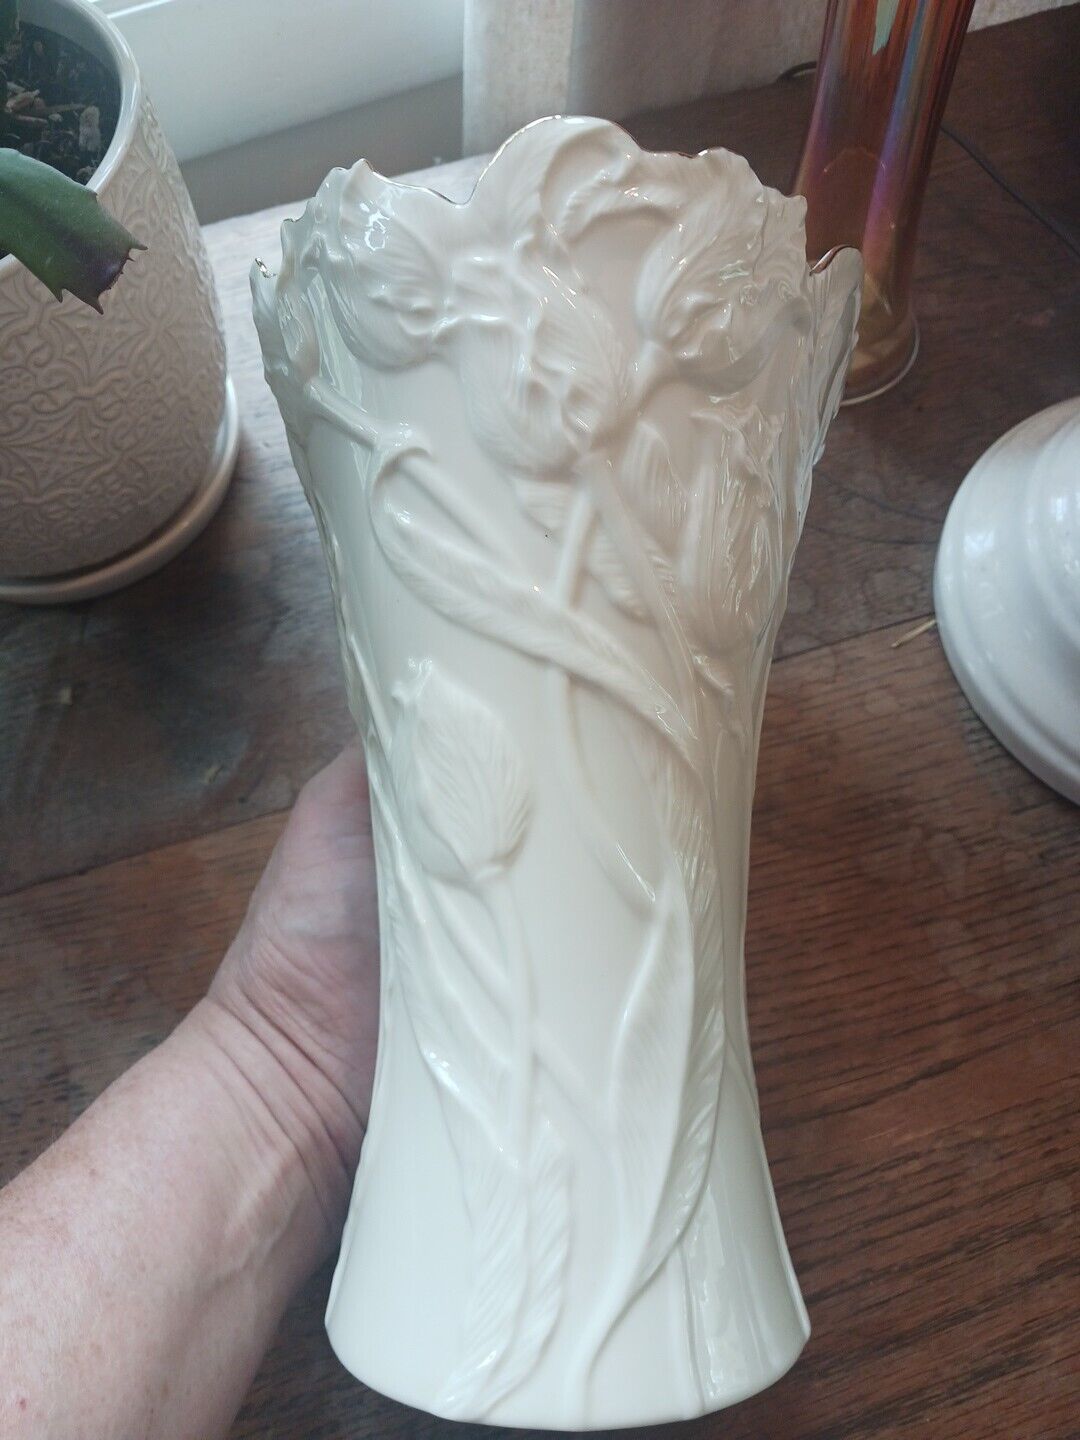 LENOX Ivory Tulip 9.25” Tall Gold Trim Scalloped Vase Mint Condition